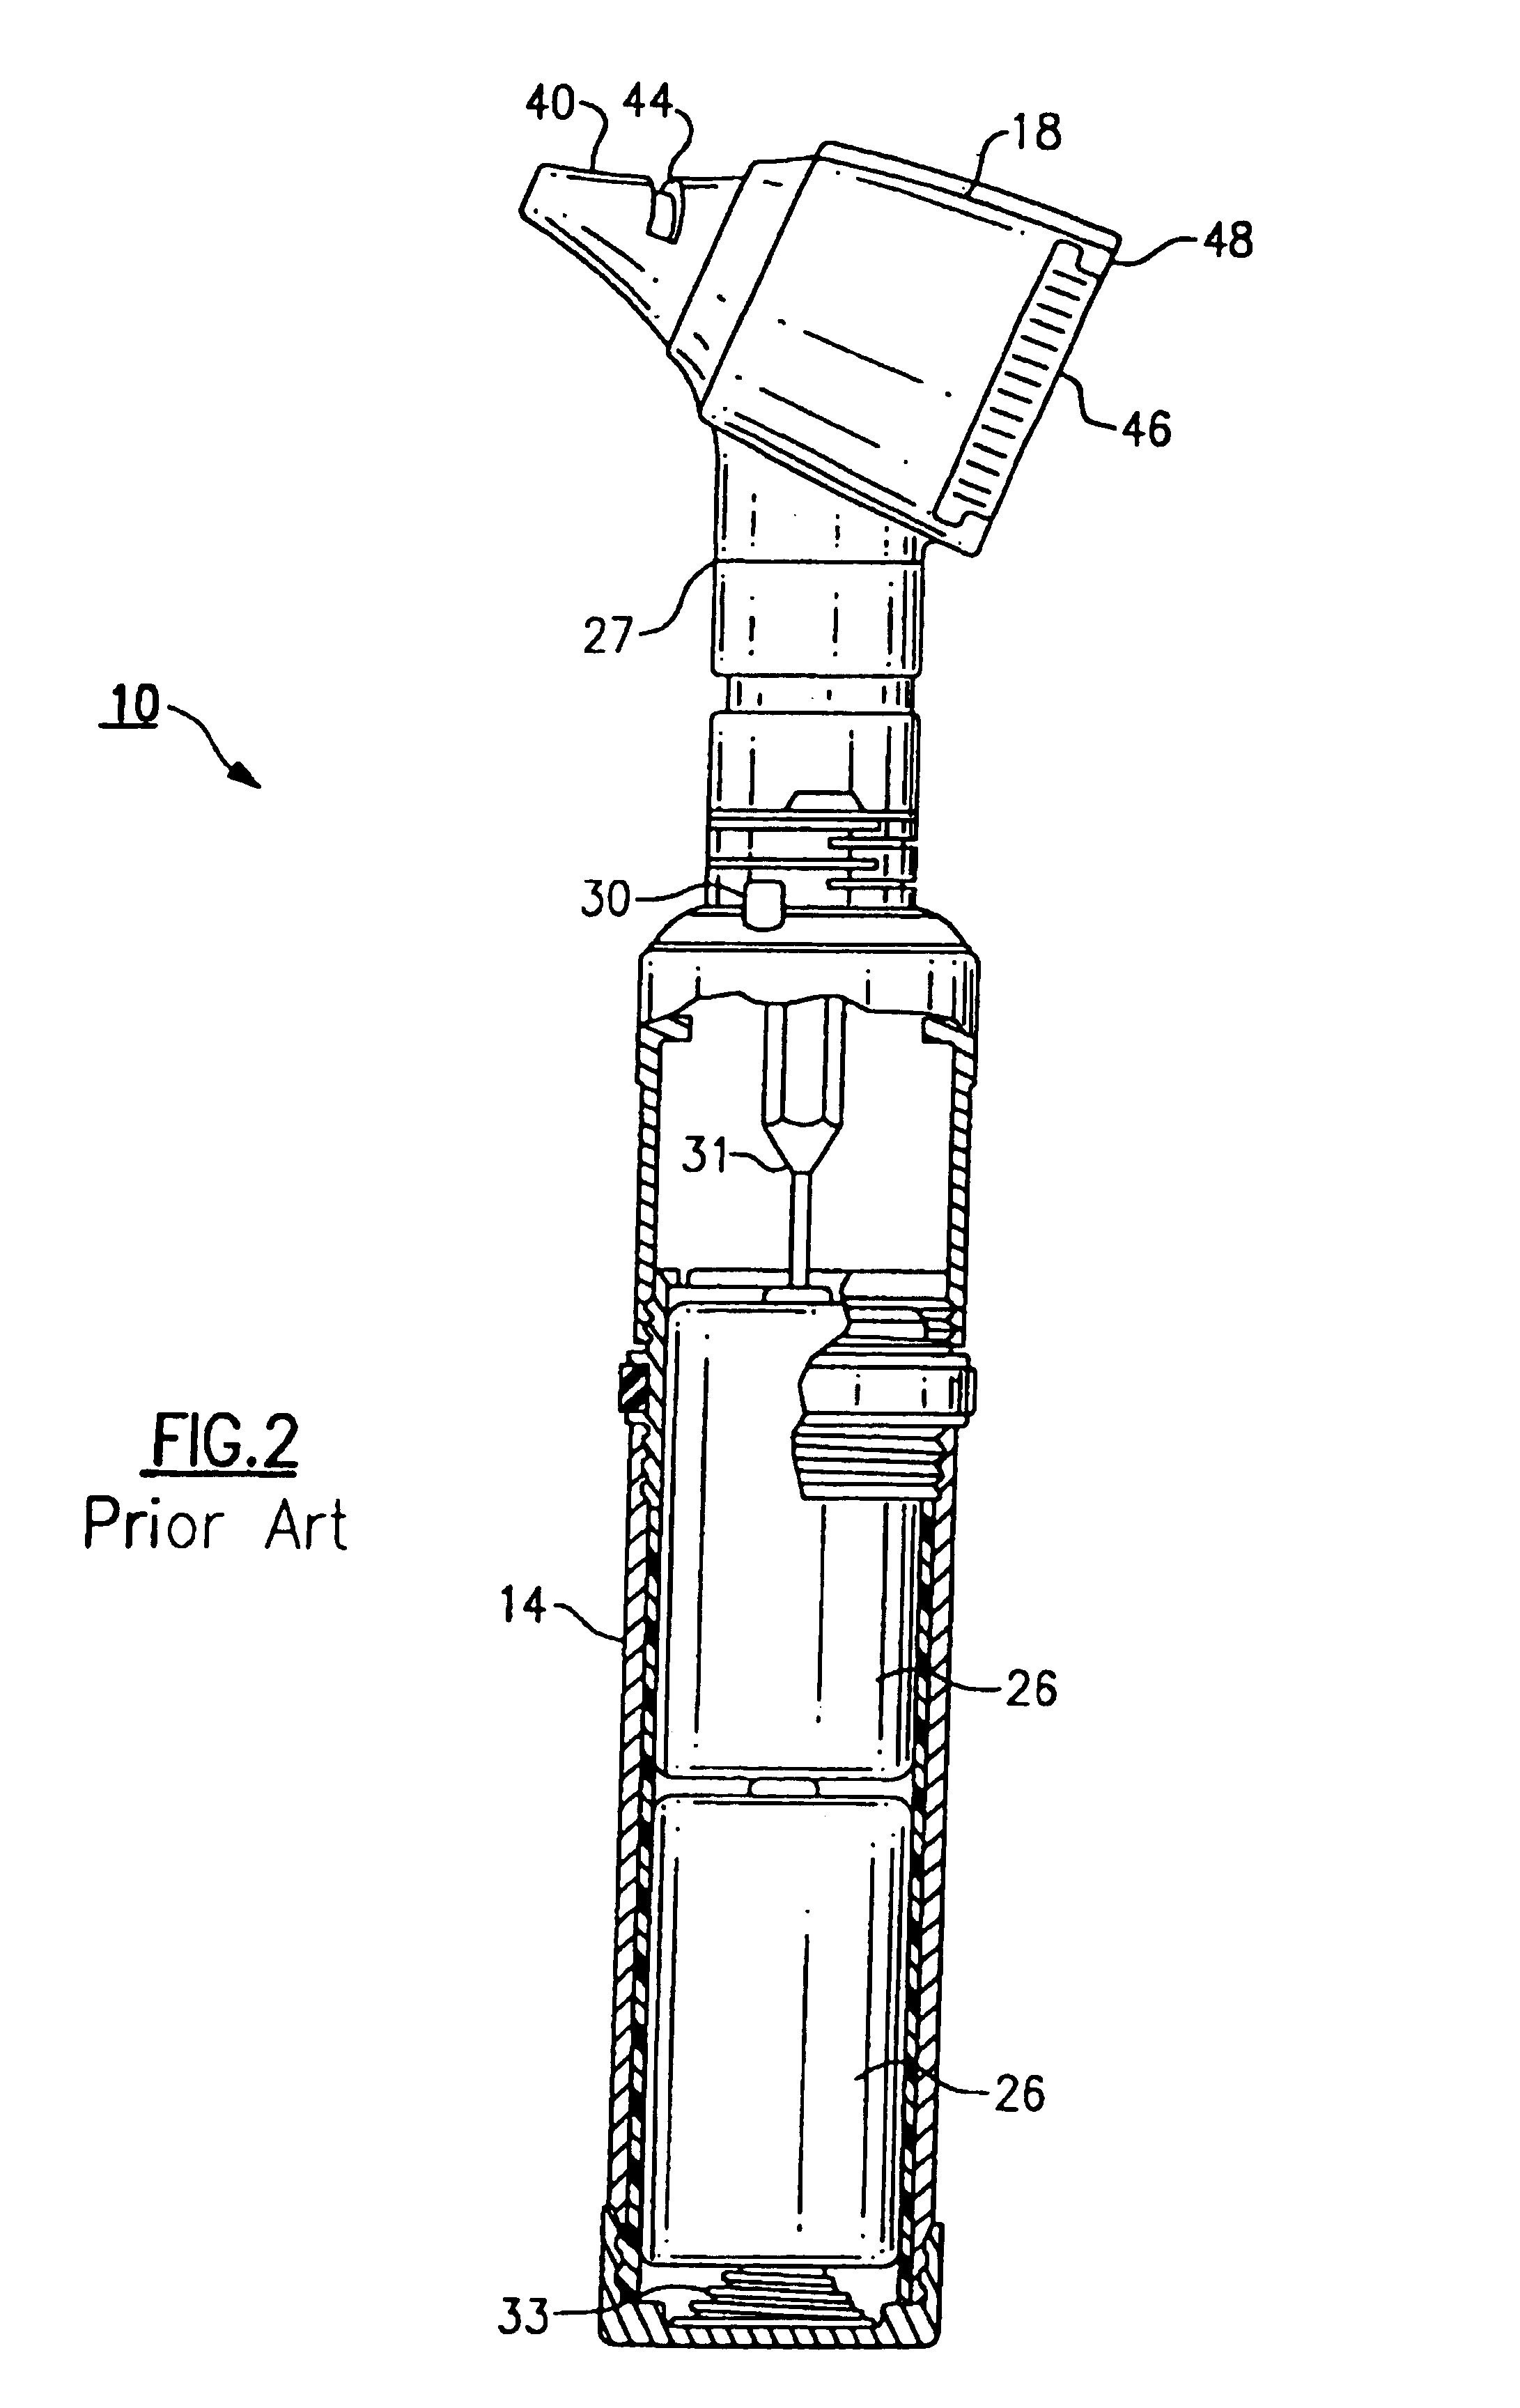 Electrical adapter for medical diagnostic instruments using LEDs as illumination sources